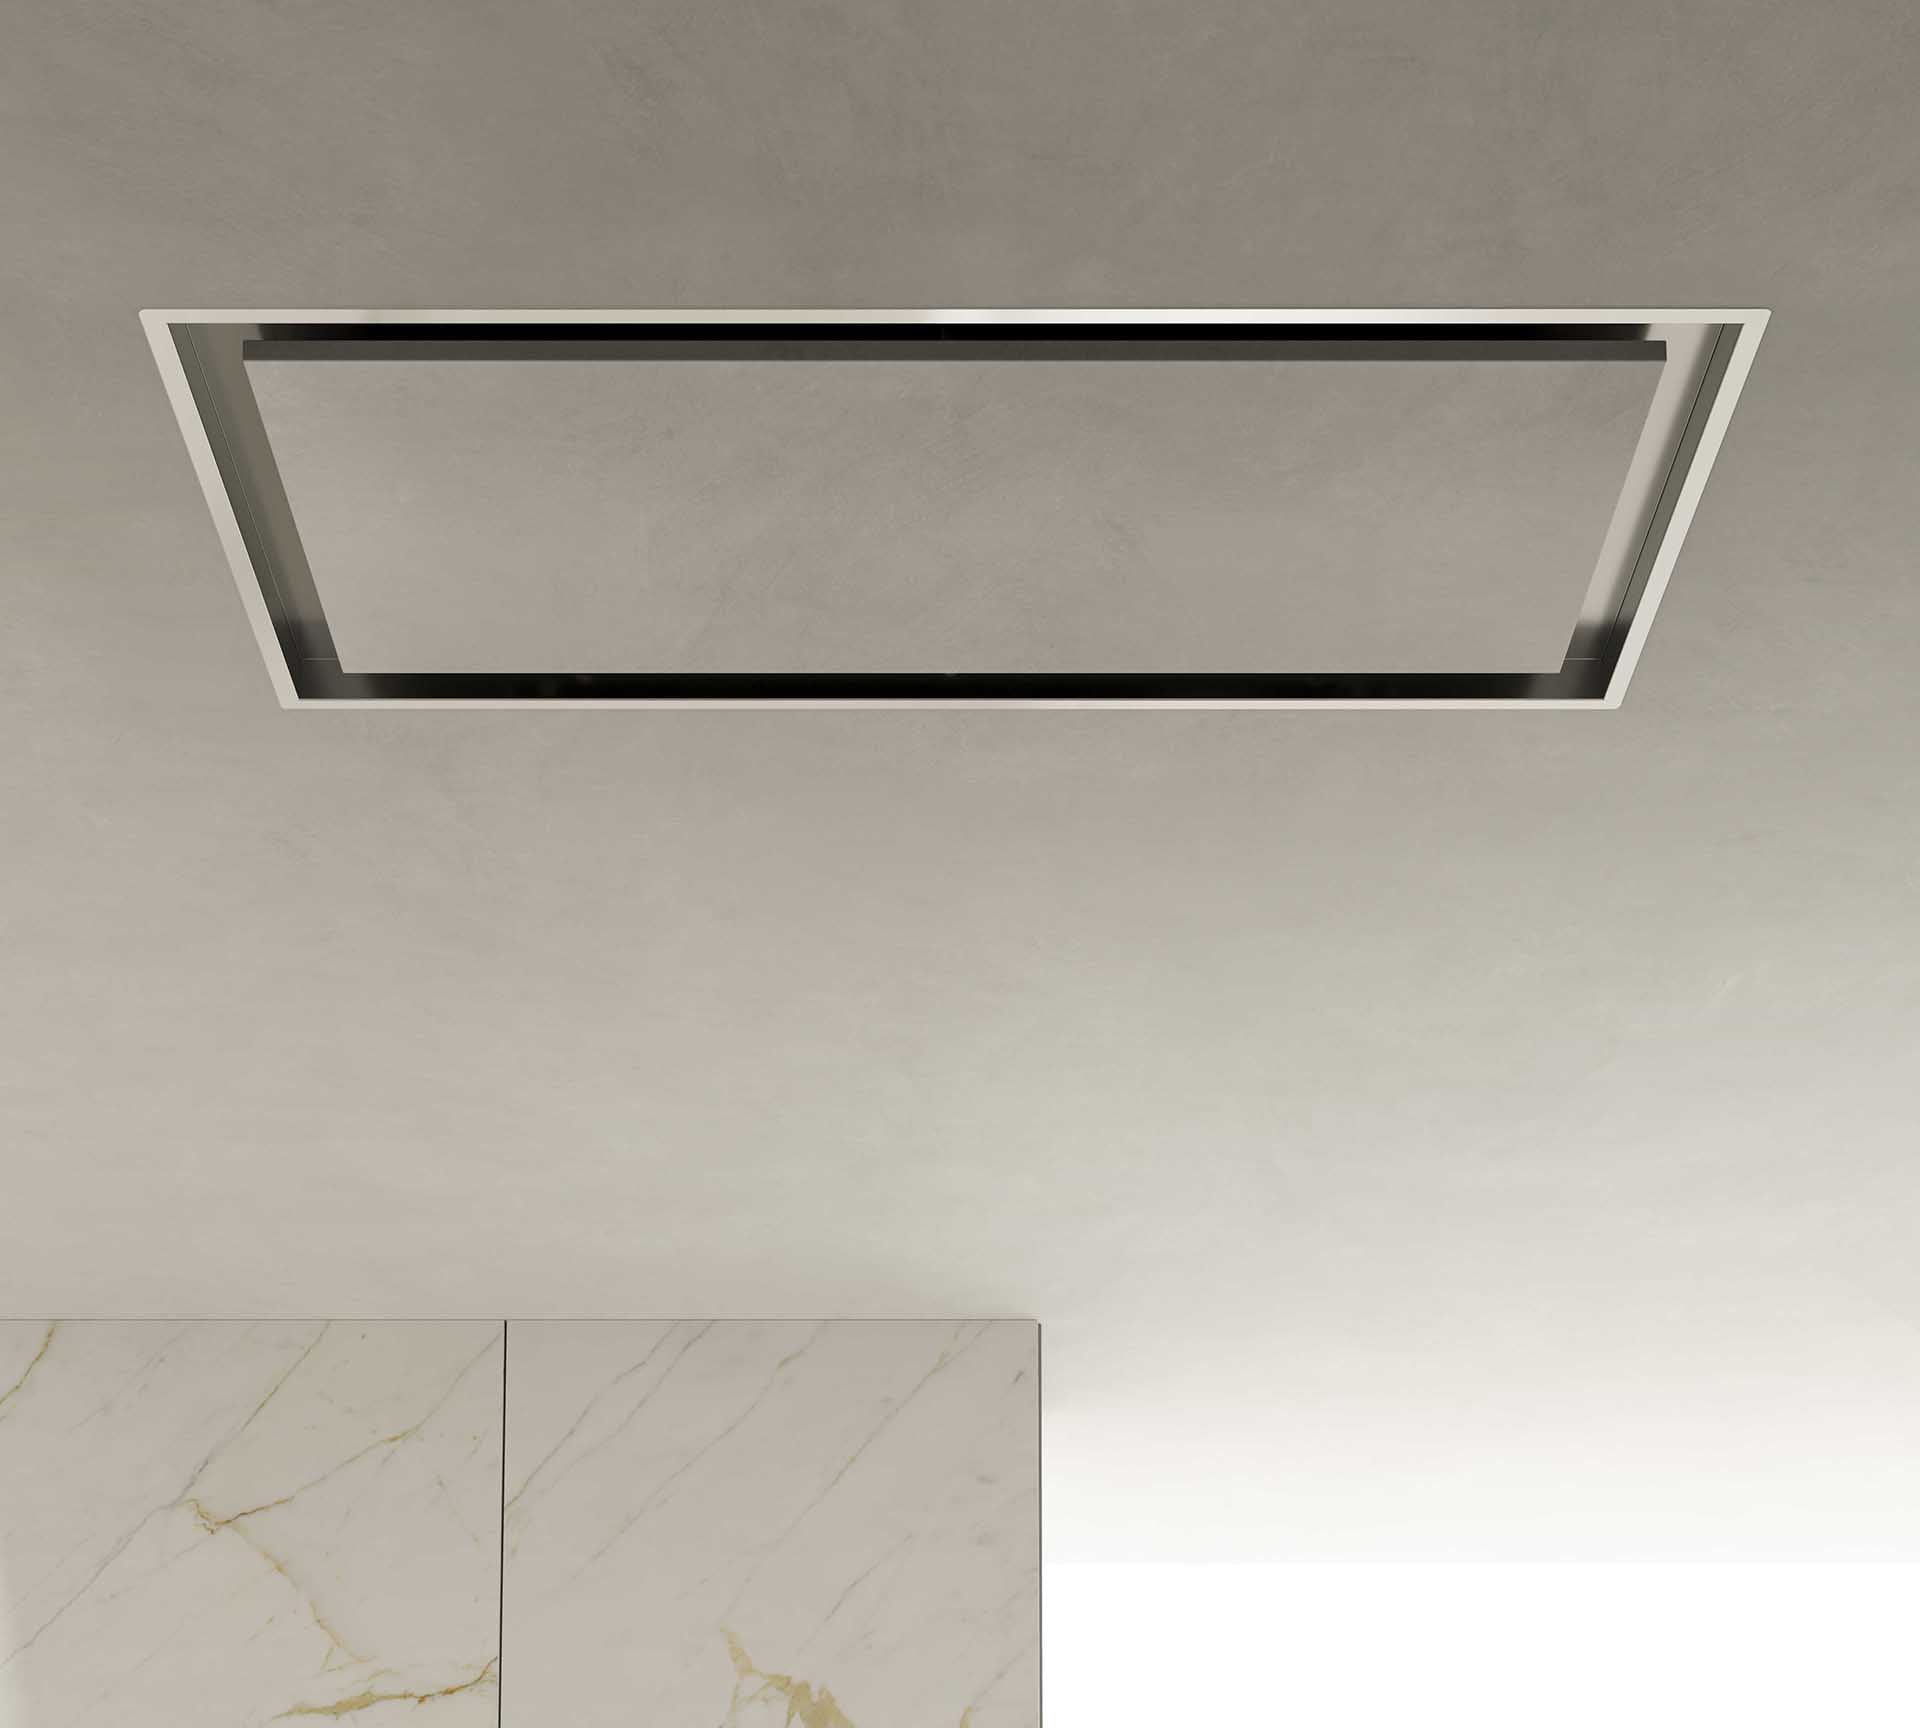 Airforce Raffaello 100cm Paintable Stainless Steel Ceiling Cooker hood integra ready with Easy up Installation with Remote Control